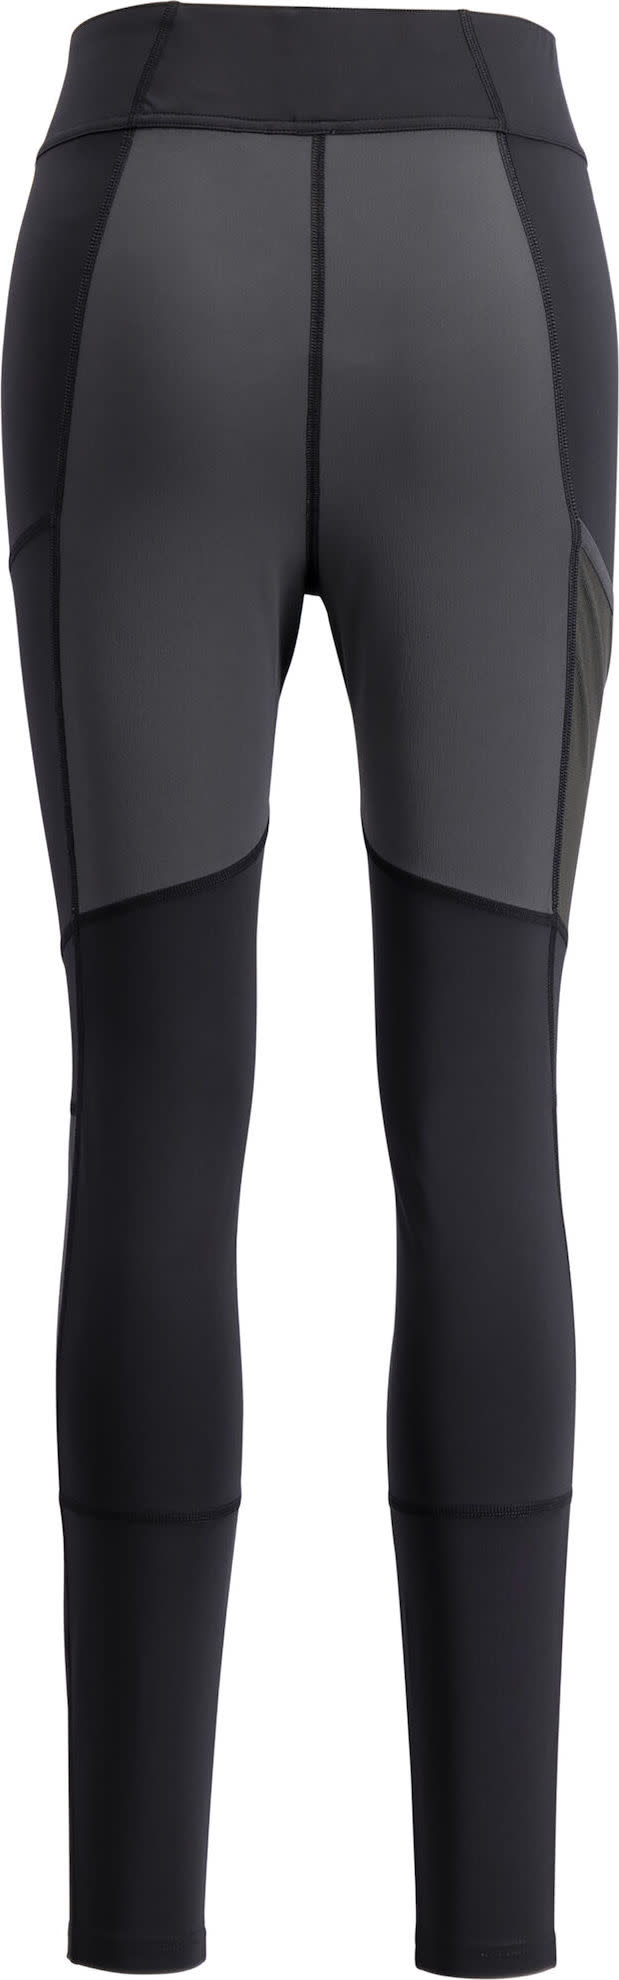 Lundhags Women's Tived Tights Black/Charcoal Lundhags